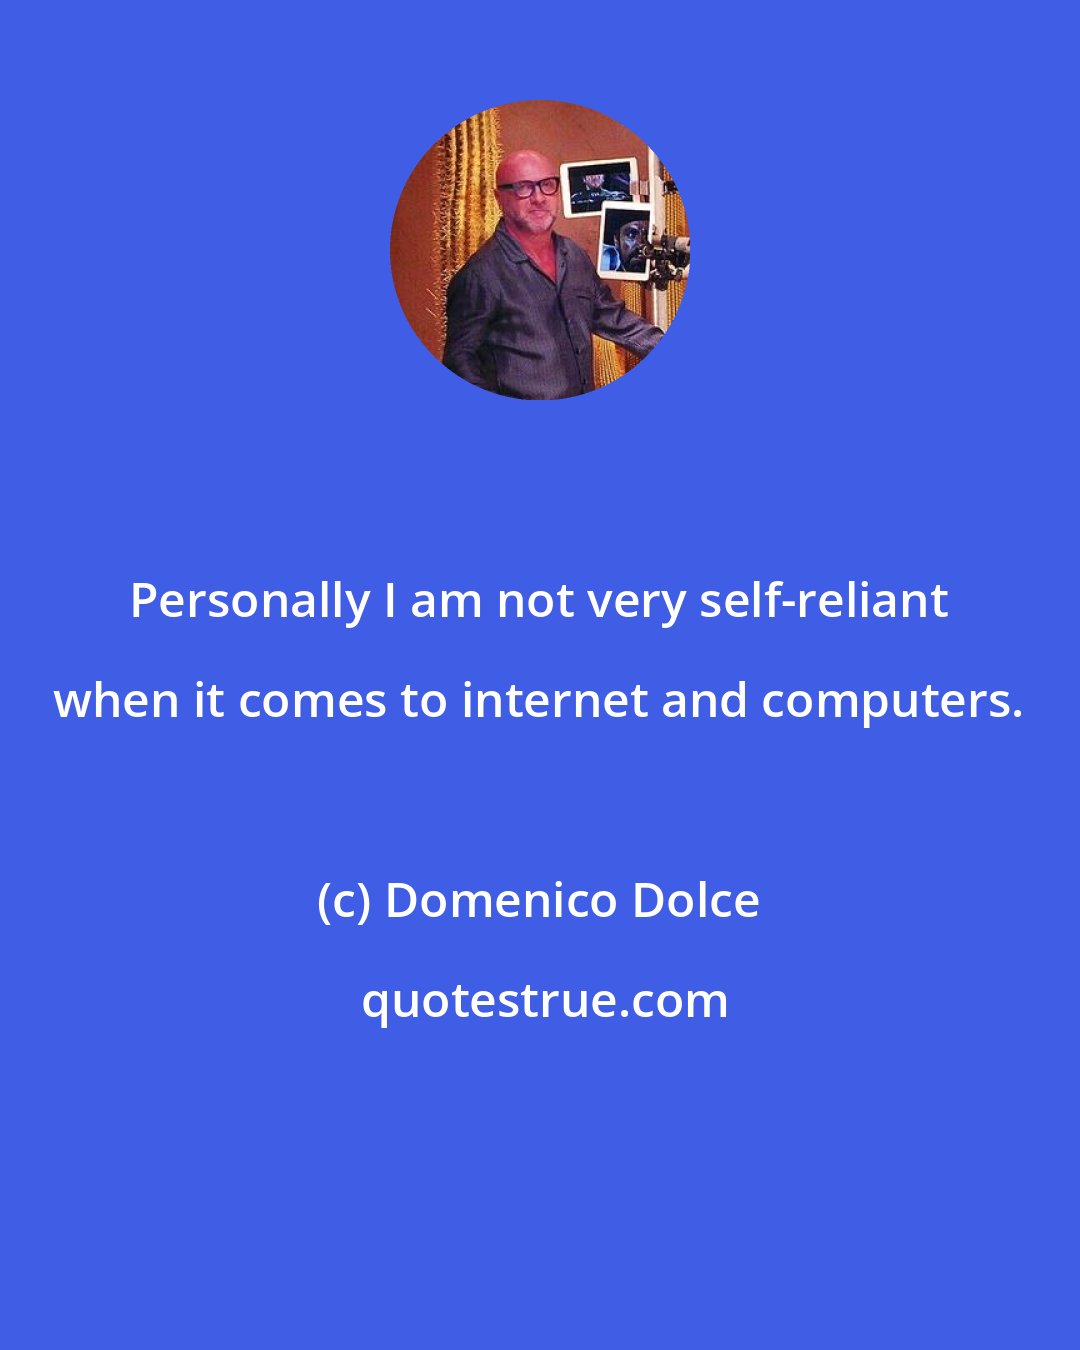 Domenico Dolce: Personally I am not very self-reliant when it comes to internet and computers.